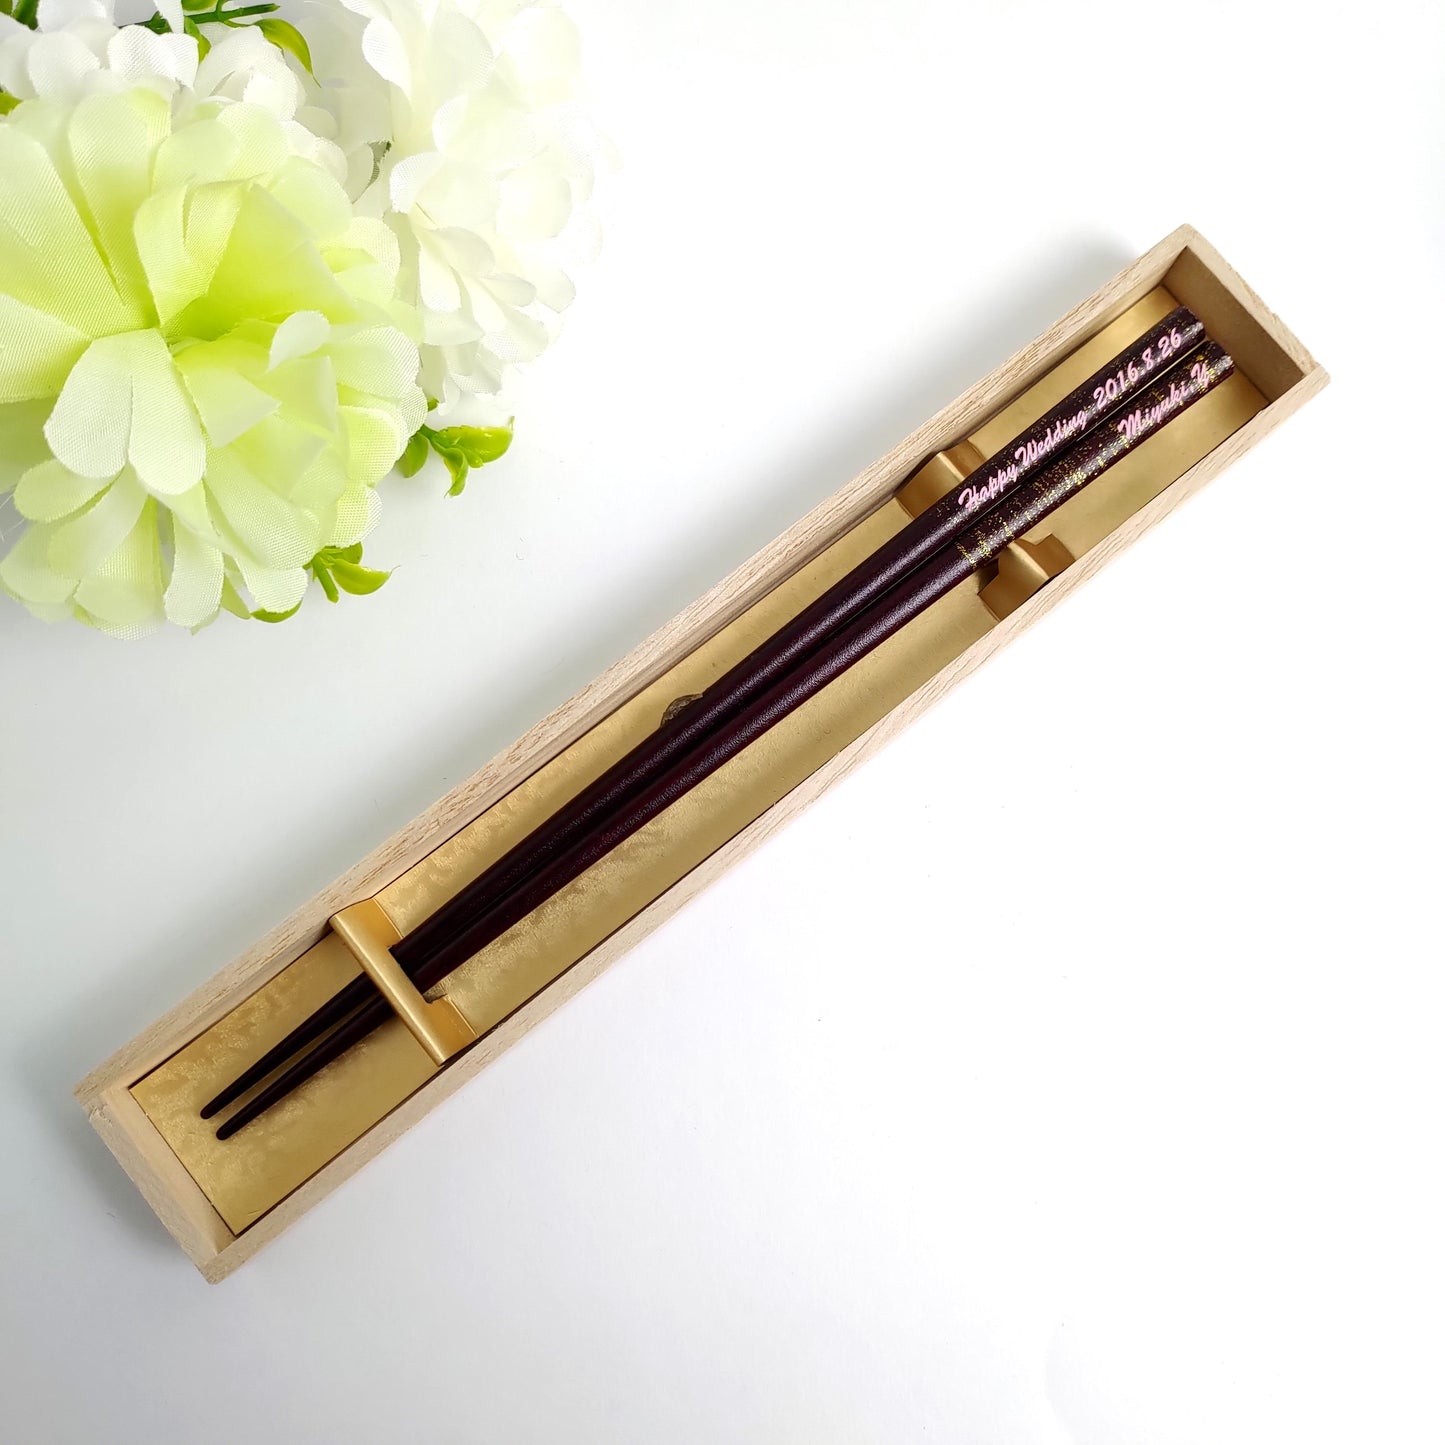 Snow falls Japanese chopsticks black red - SINGLE PAIR WITH ENGRAVED WOODEN BOX SET